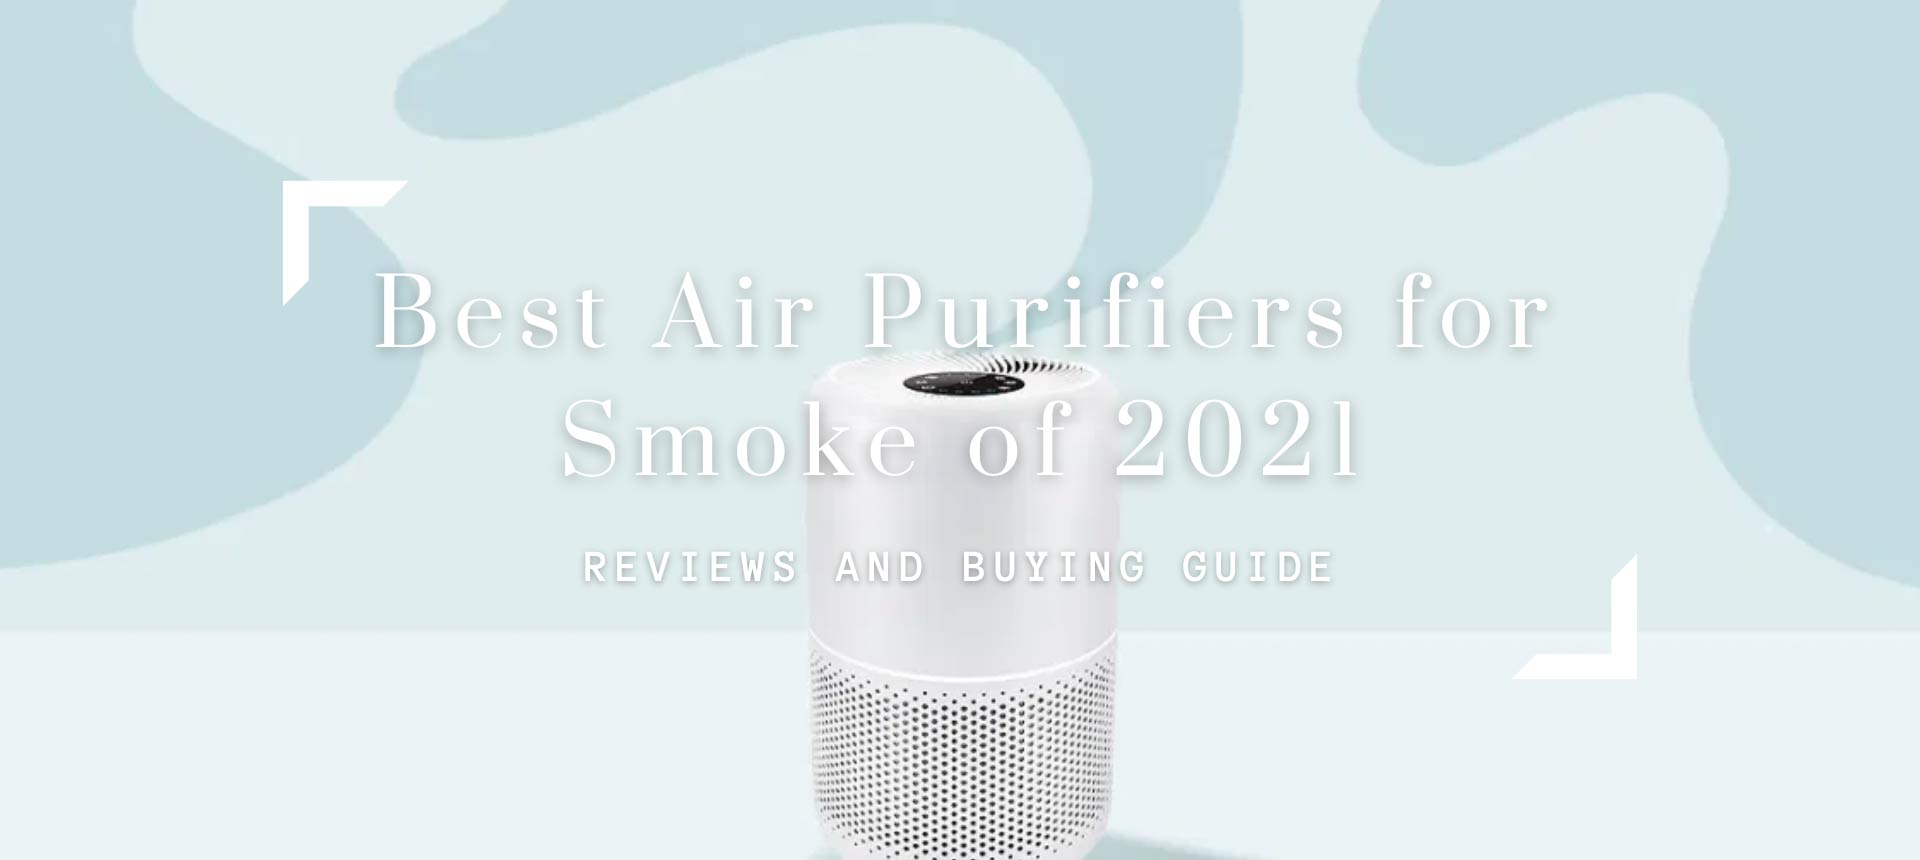 Best Air Purifiers for Smoke of 2021